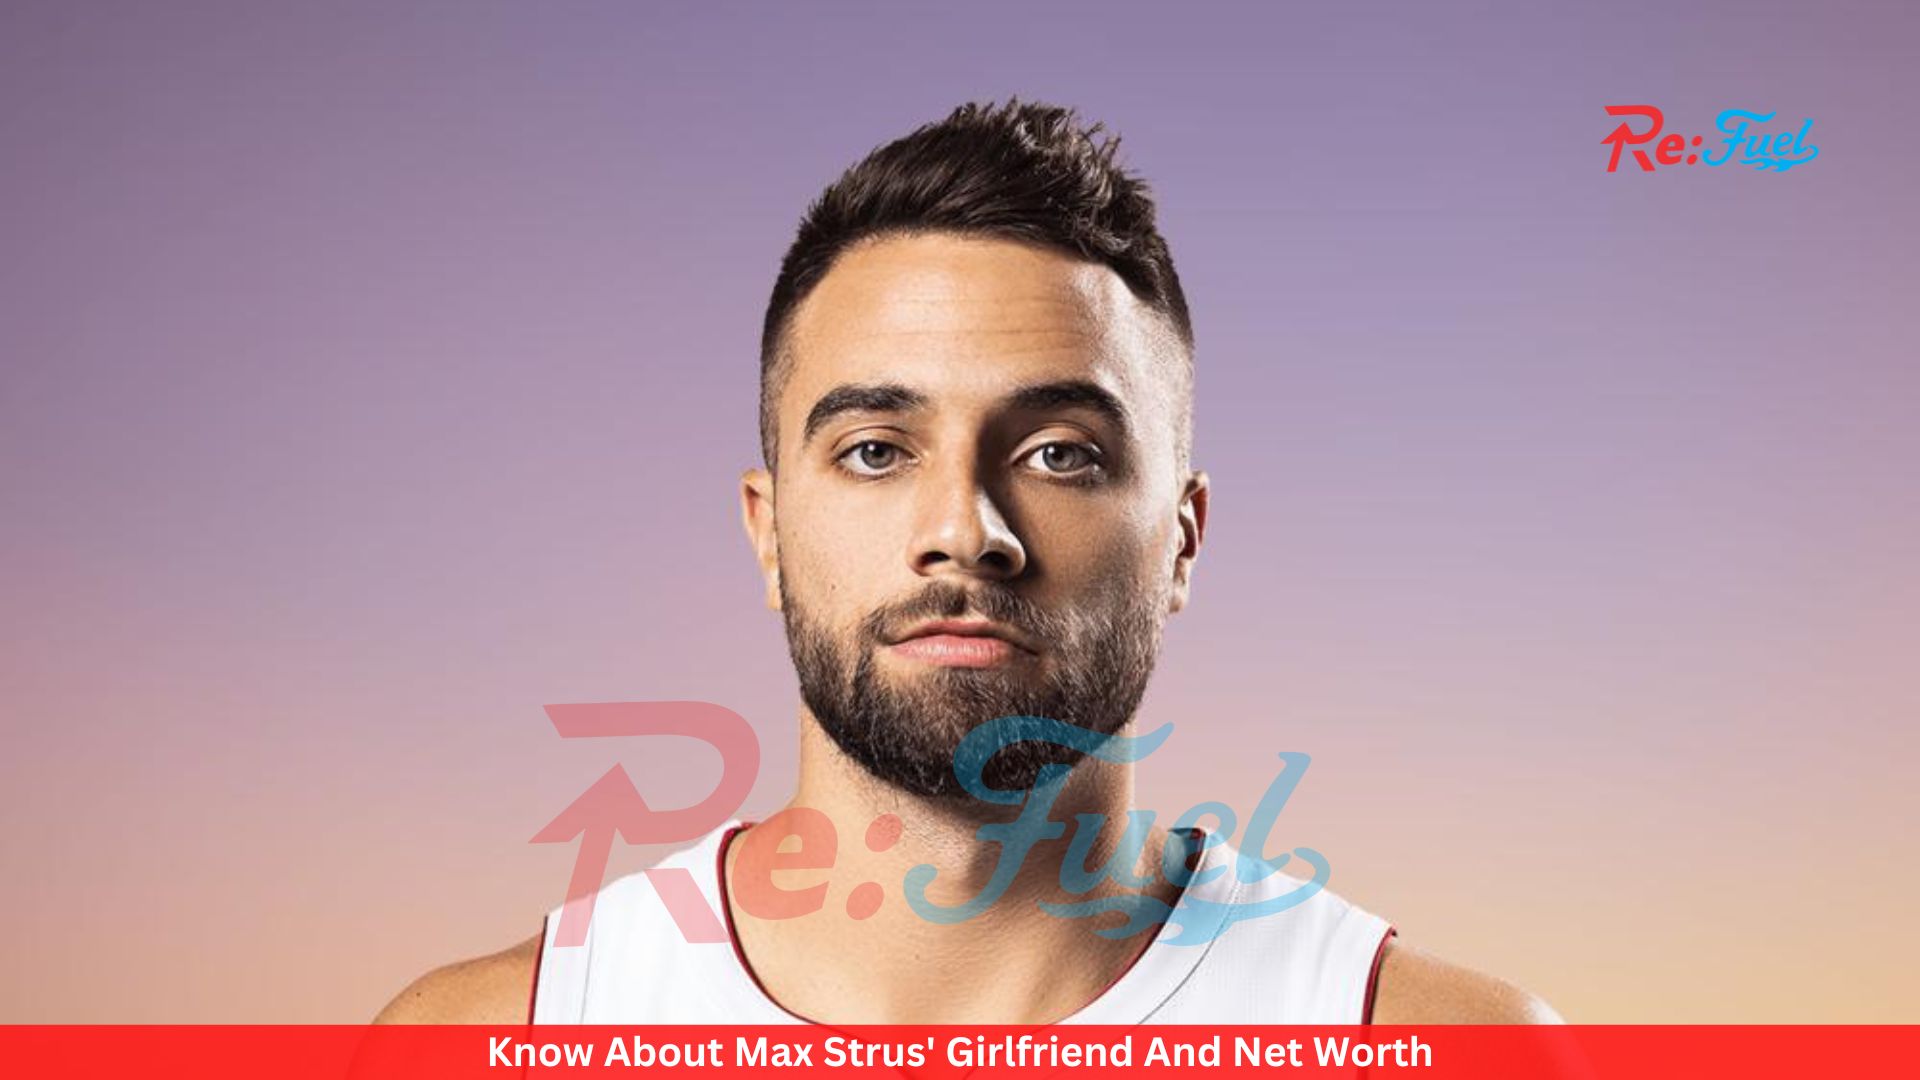 Know About Max Strus' Girlfriend And Net Worth